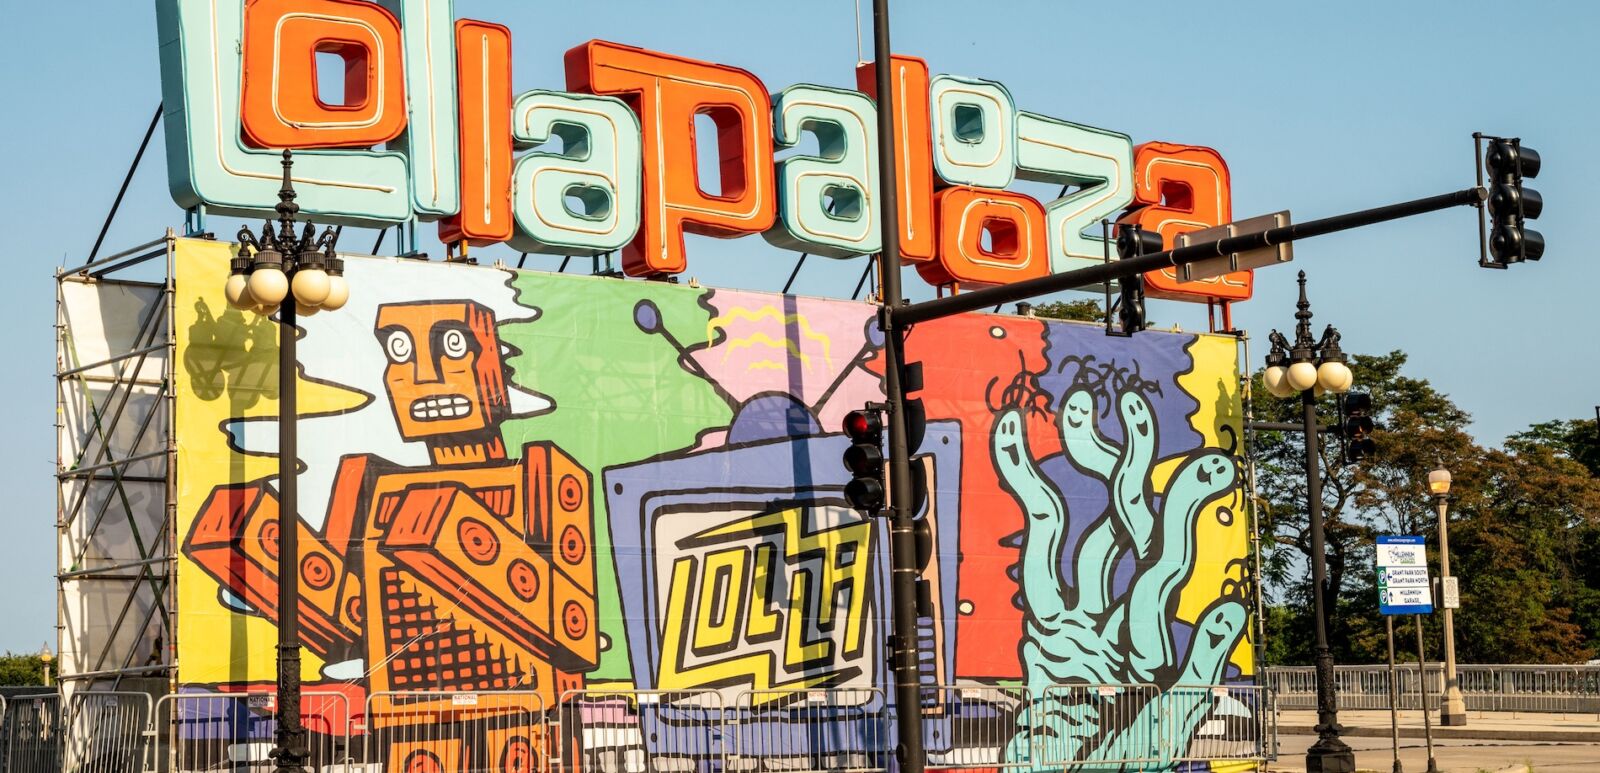 Chicago, IL - August 1, 2021: The temporary Lollapalooza sign downtown Chicago, at the entrance to Grant Park. Photo via Shutterstock.